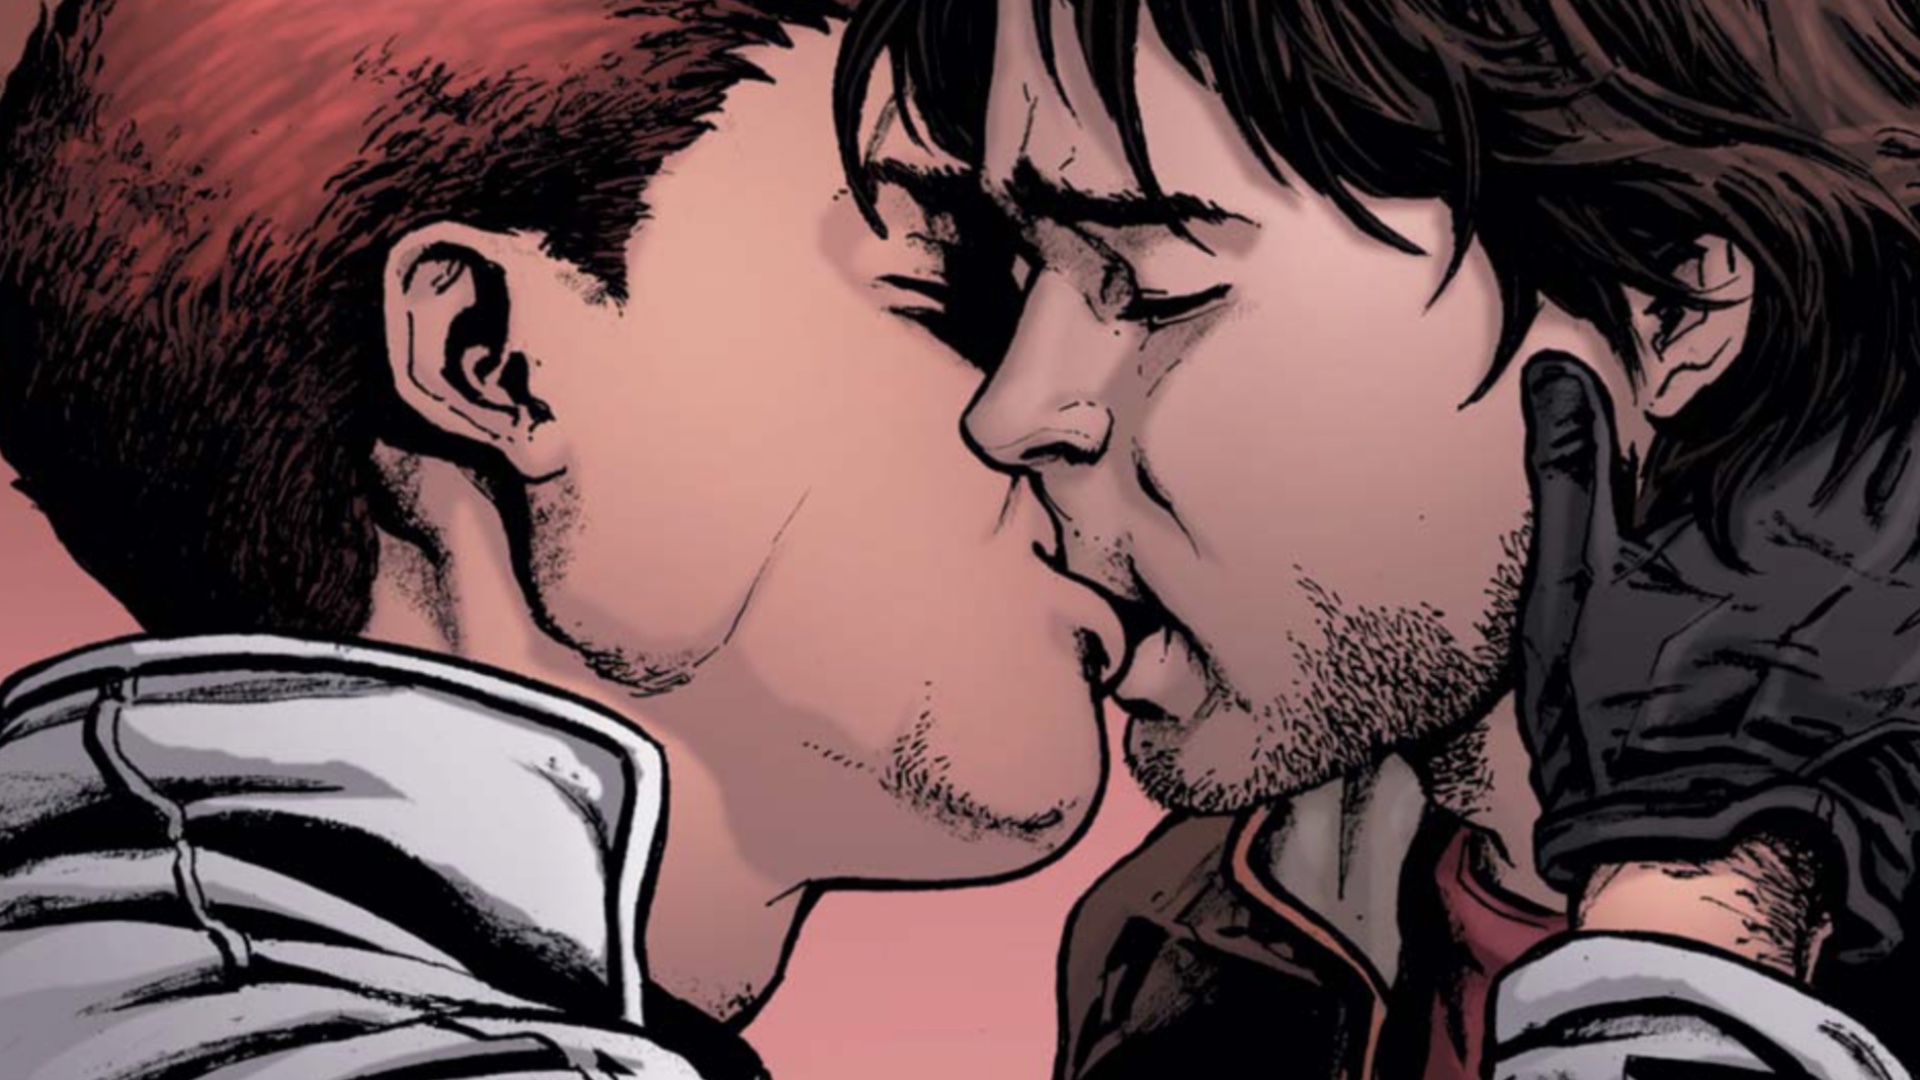 Rictor and Shatterstar